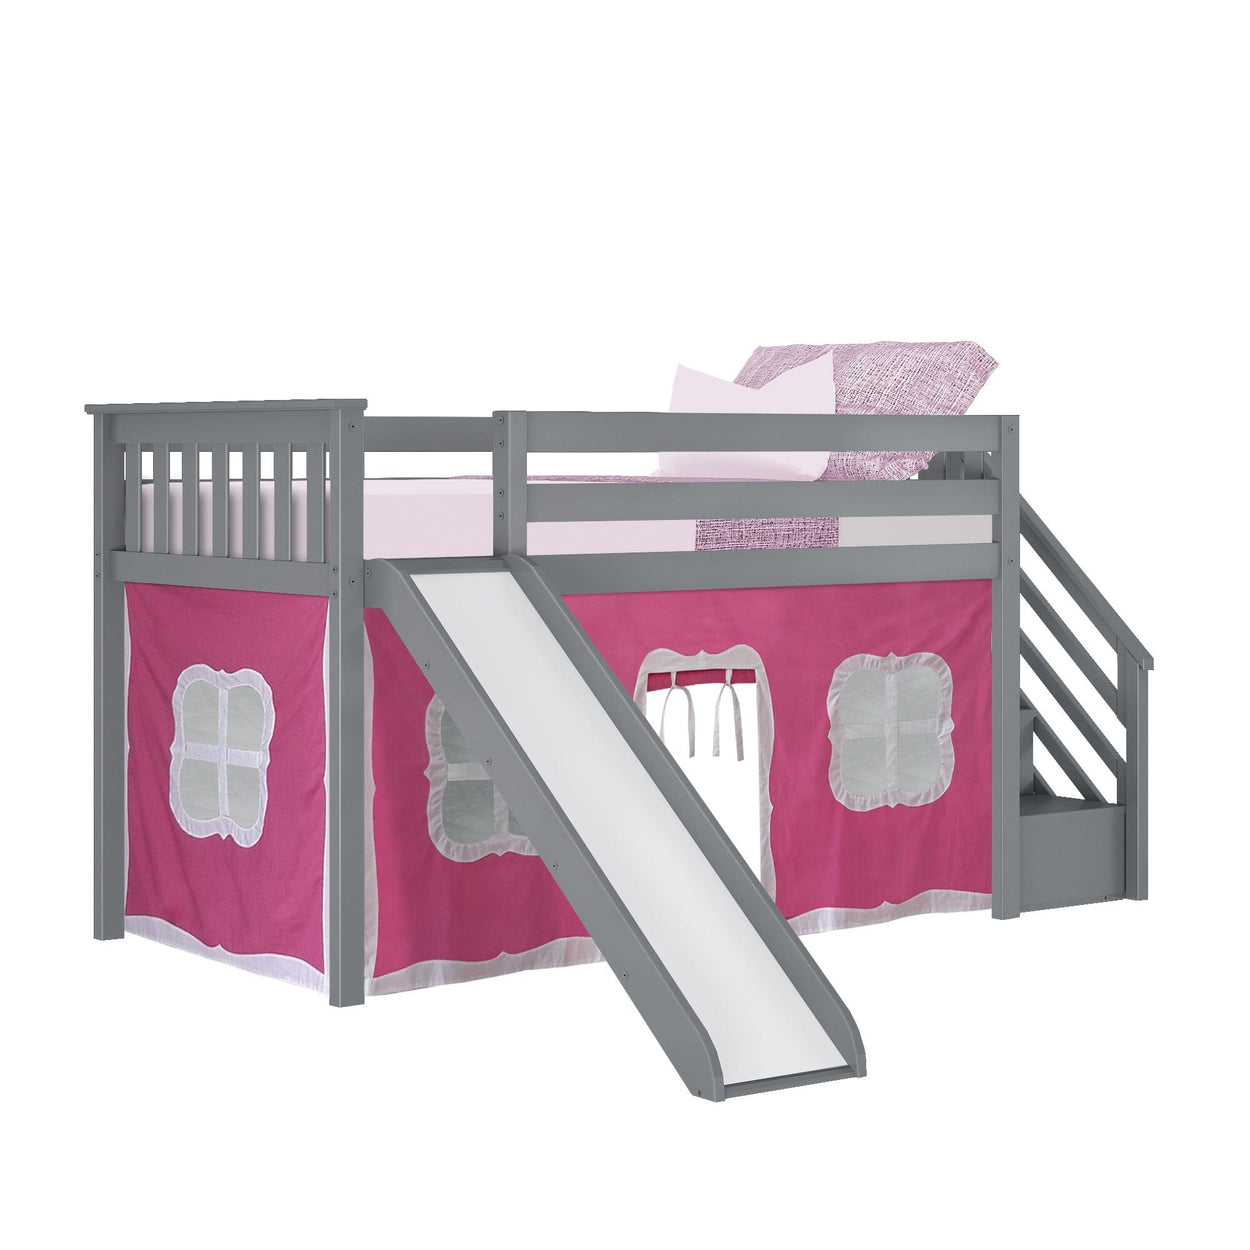 180225121078 : Loft Beds Twin Low Loft with Stairs and Slide with Curtains, Grey + Pink Curtain